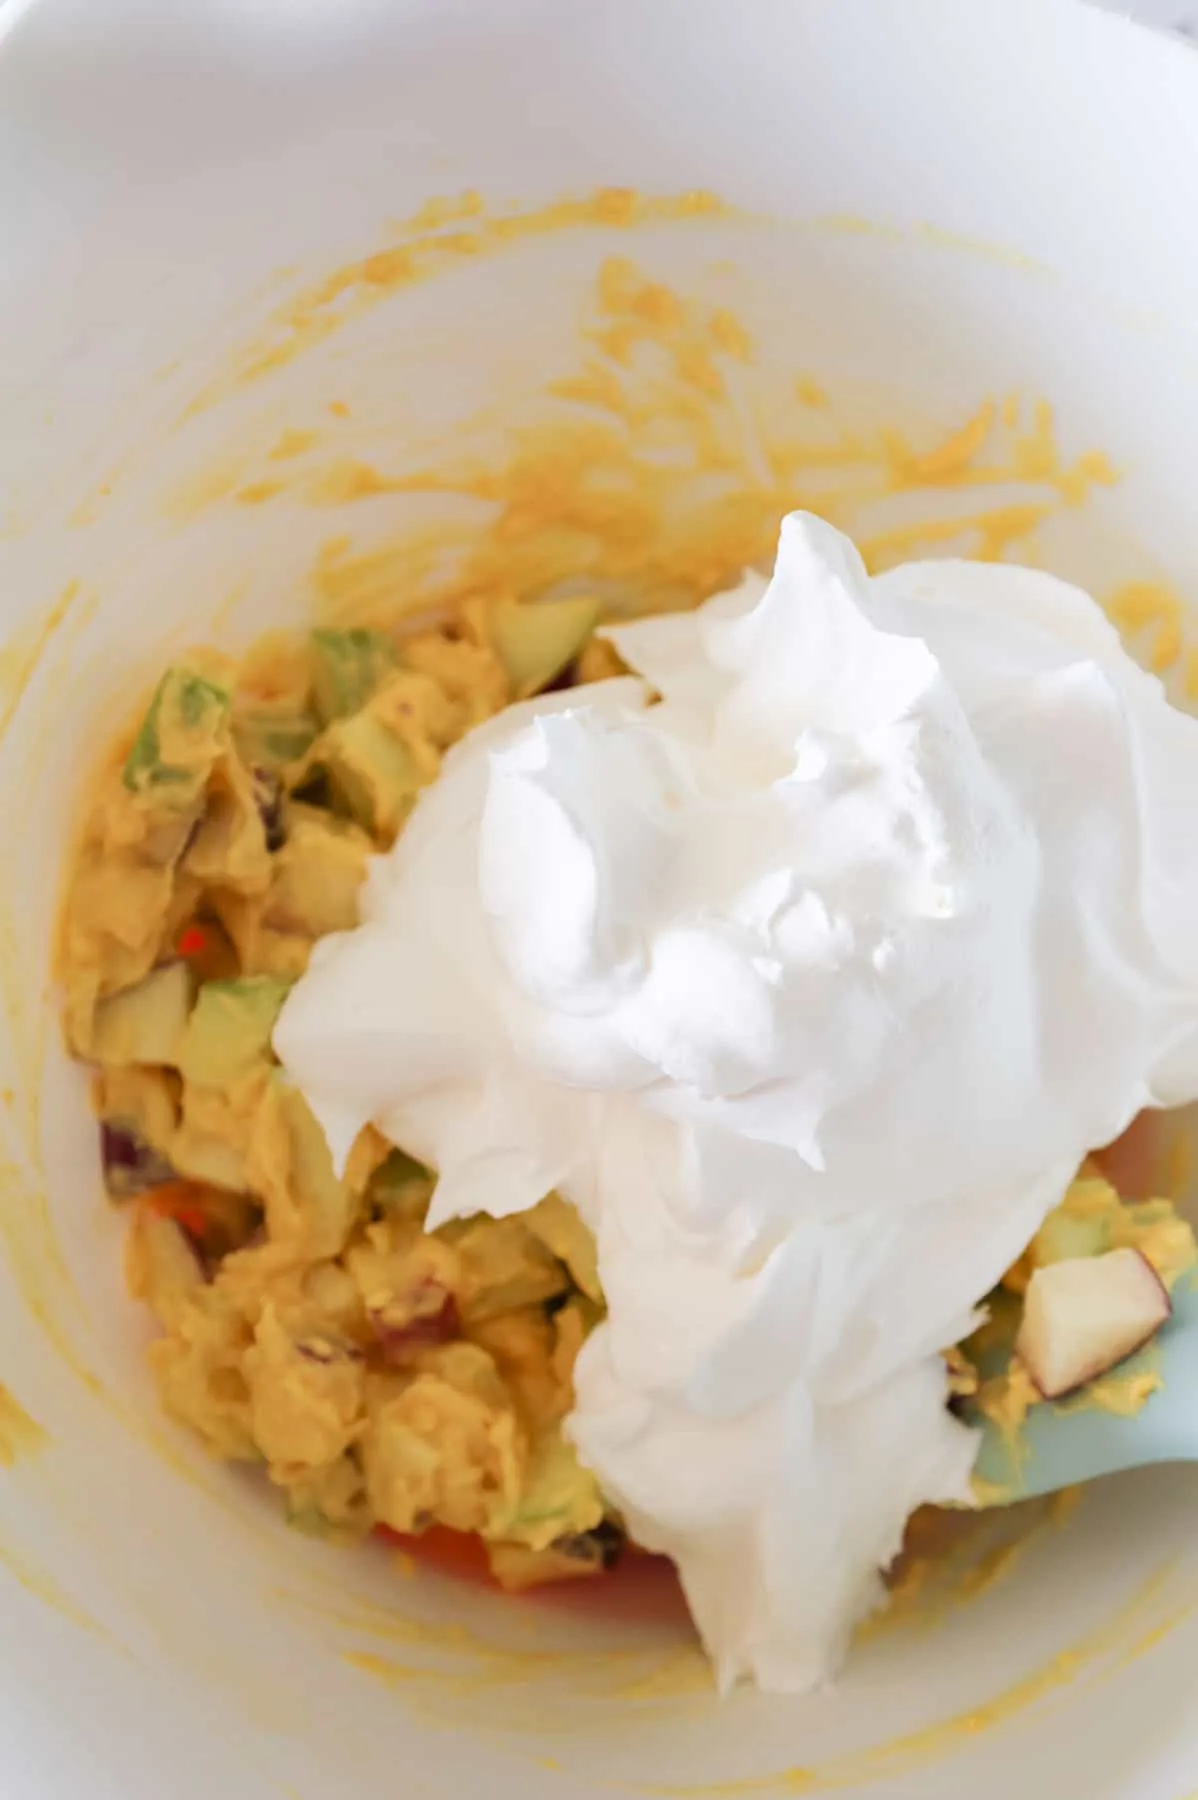 Cool Whip on top of diced apple and vanilla pudding mixture in a bowl